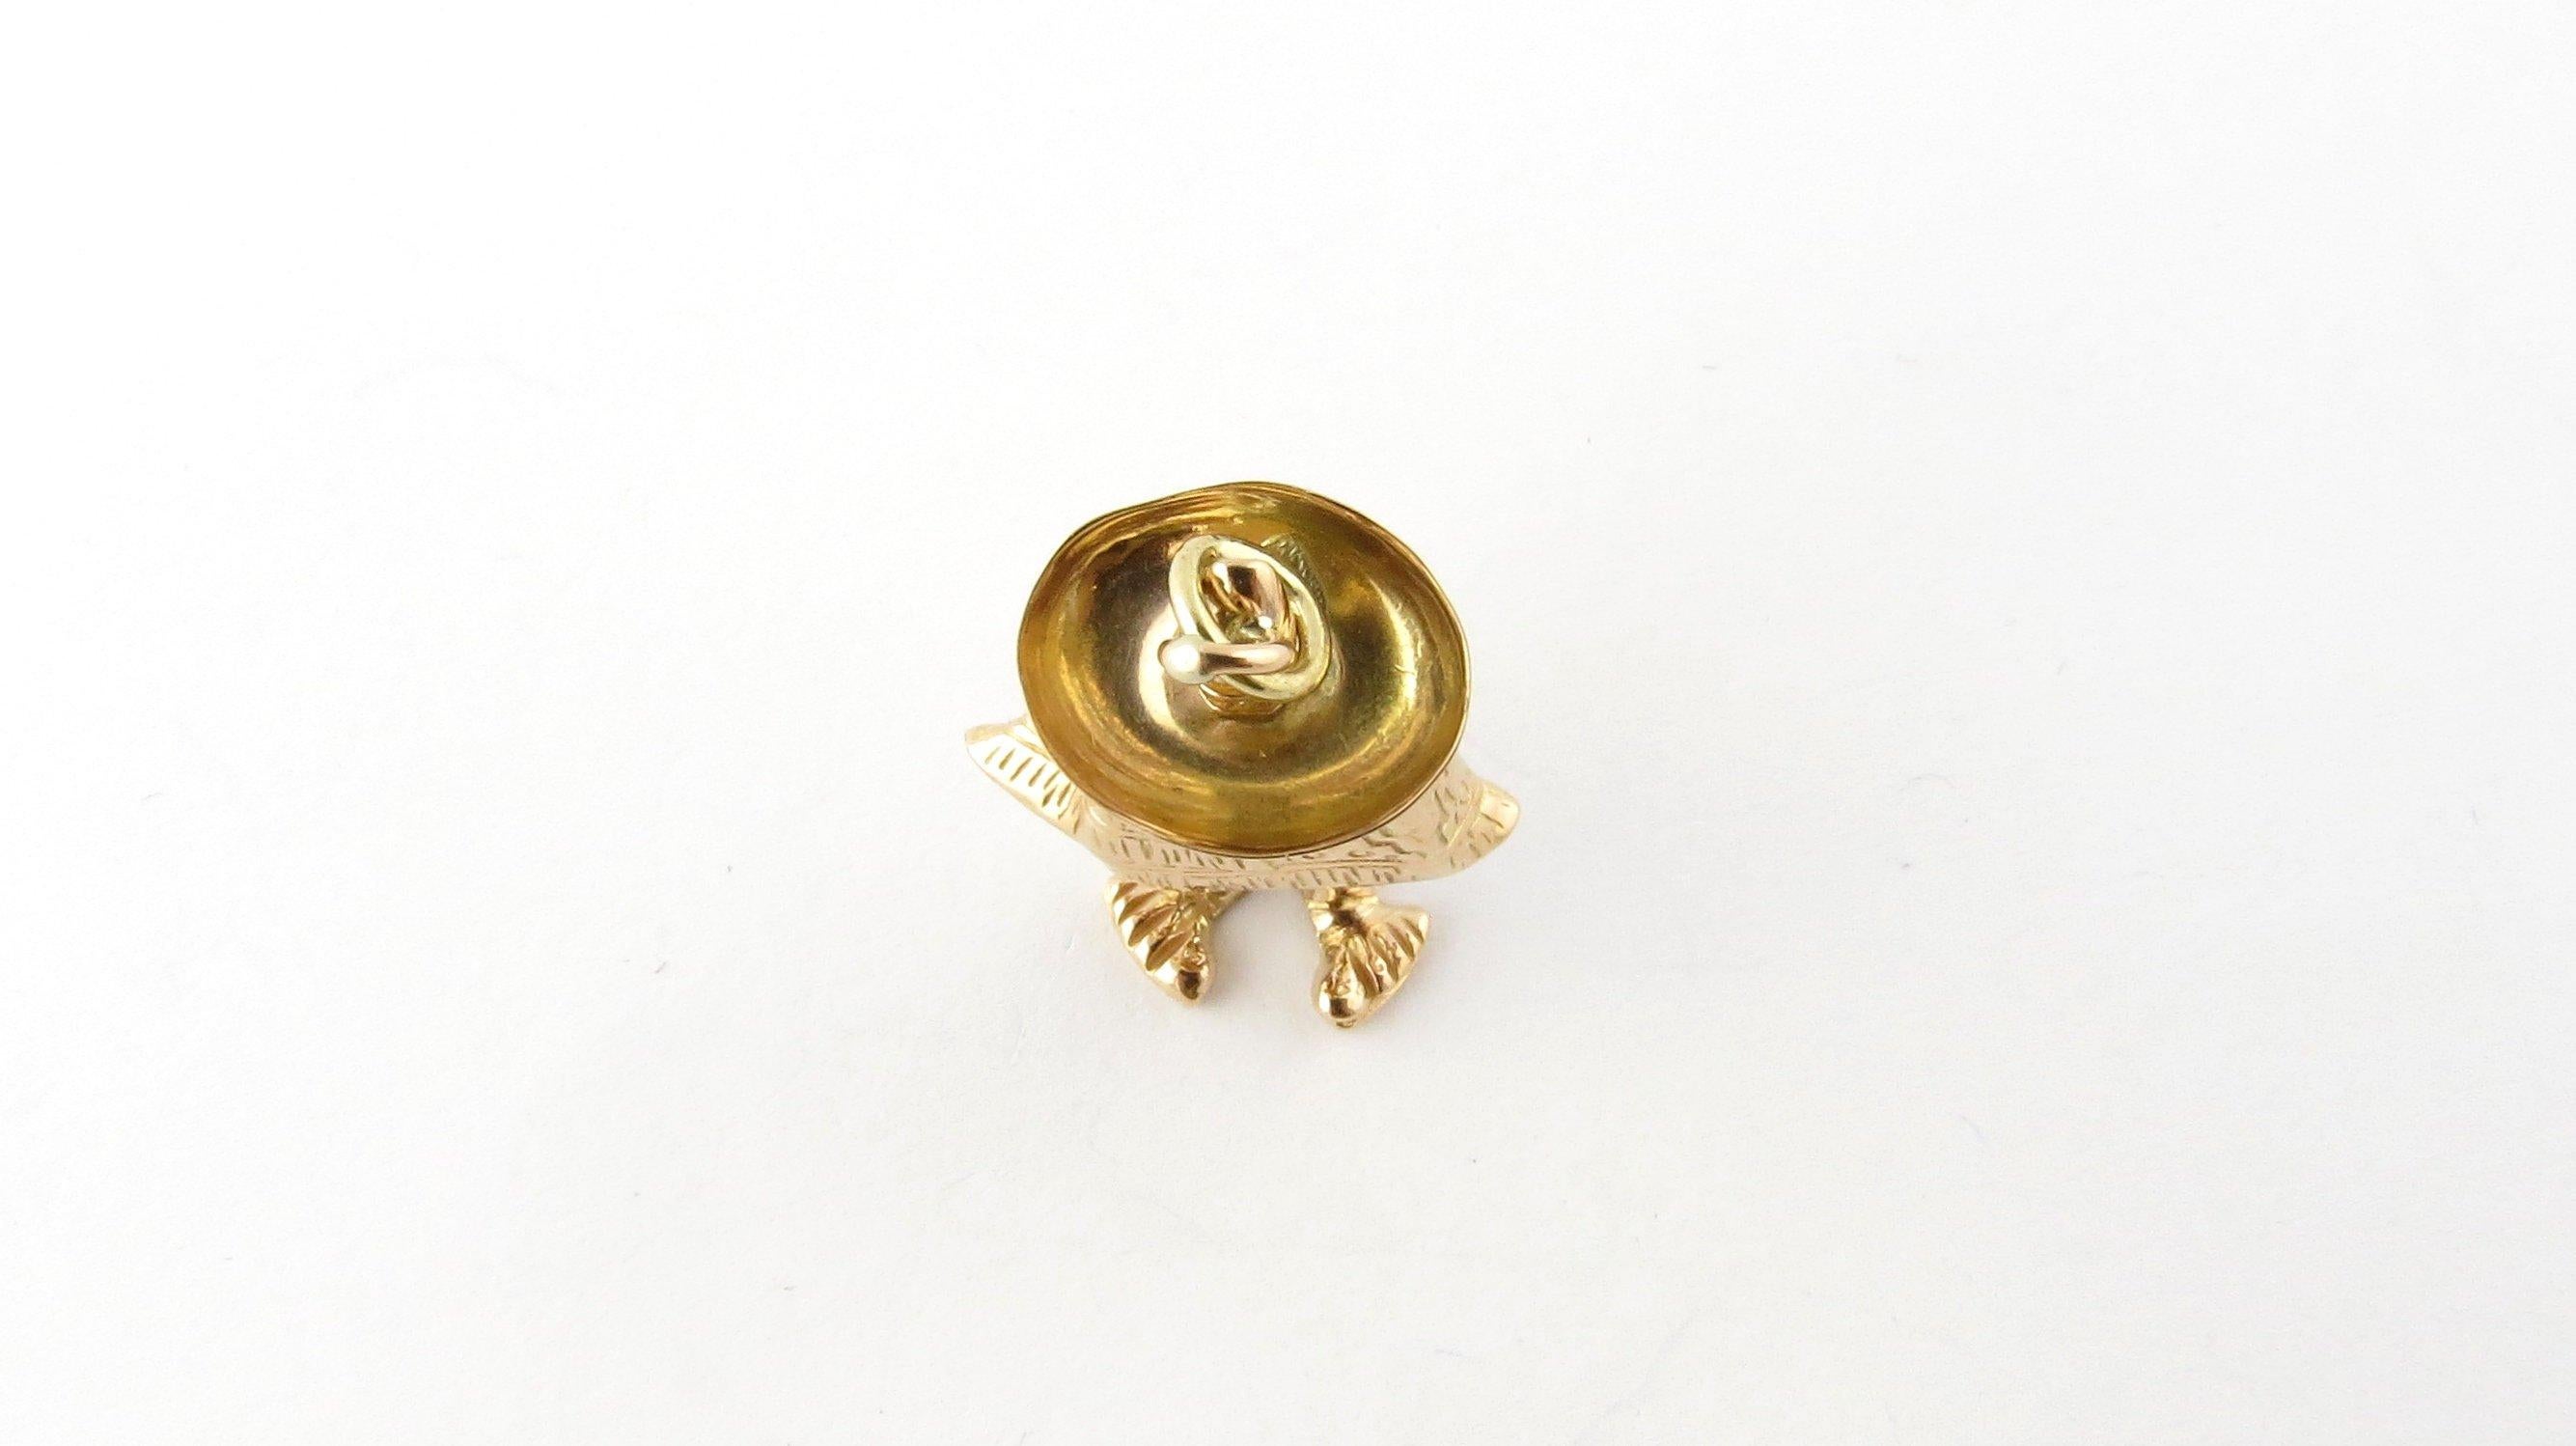 Vintage 18 Karat Yellow Gold Man in Mexican Sombrero Charm
Perfect addition to your travel charm collection! 
This adorable charm features a man dressed in traditional sombrero and poncho meticulously detailed in 18K yellow gold. 
Size: 25 mm x 15